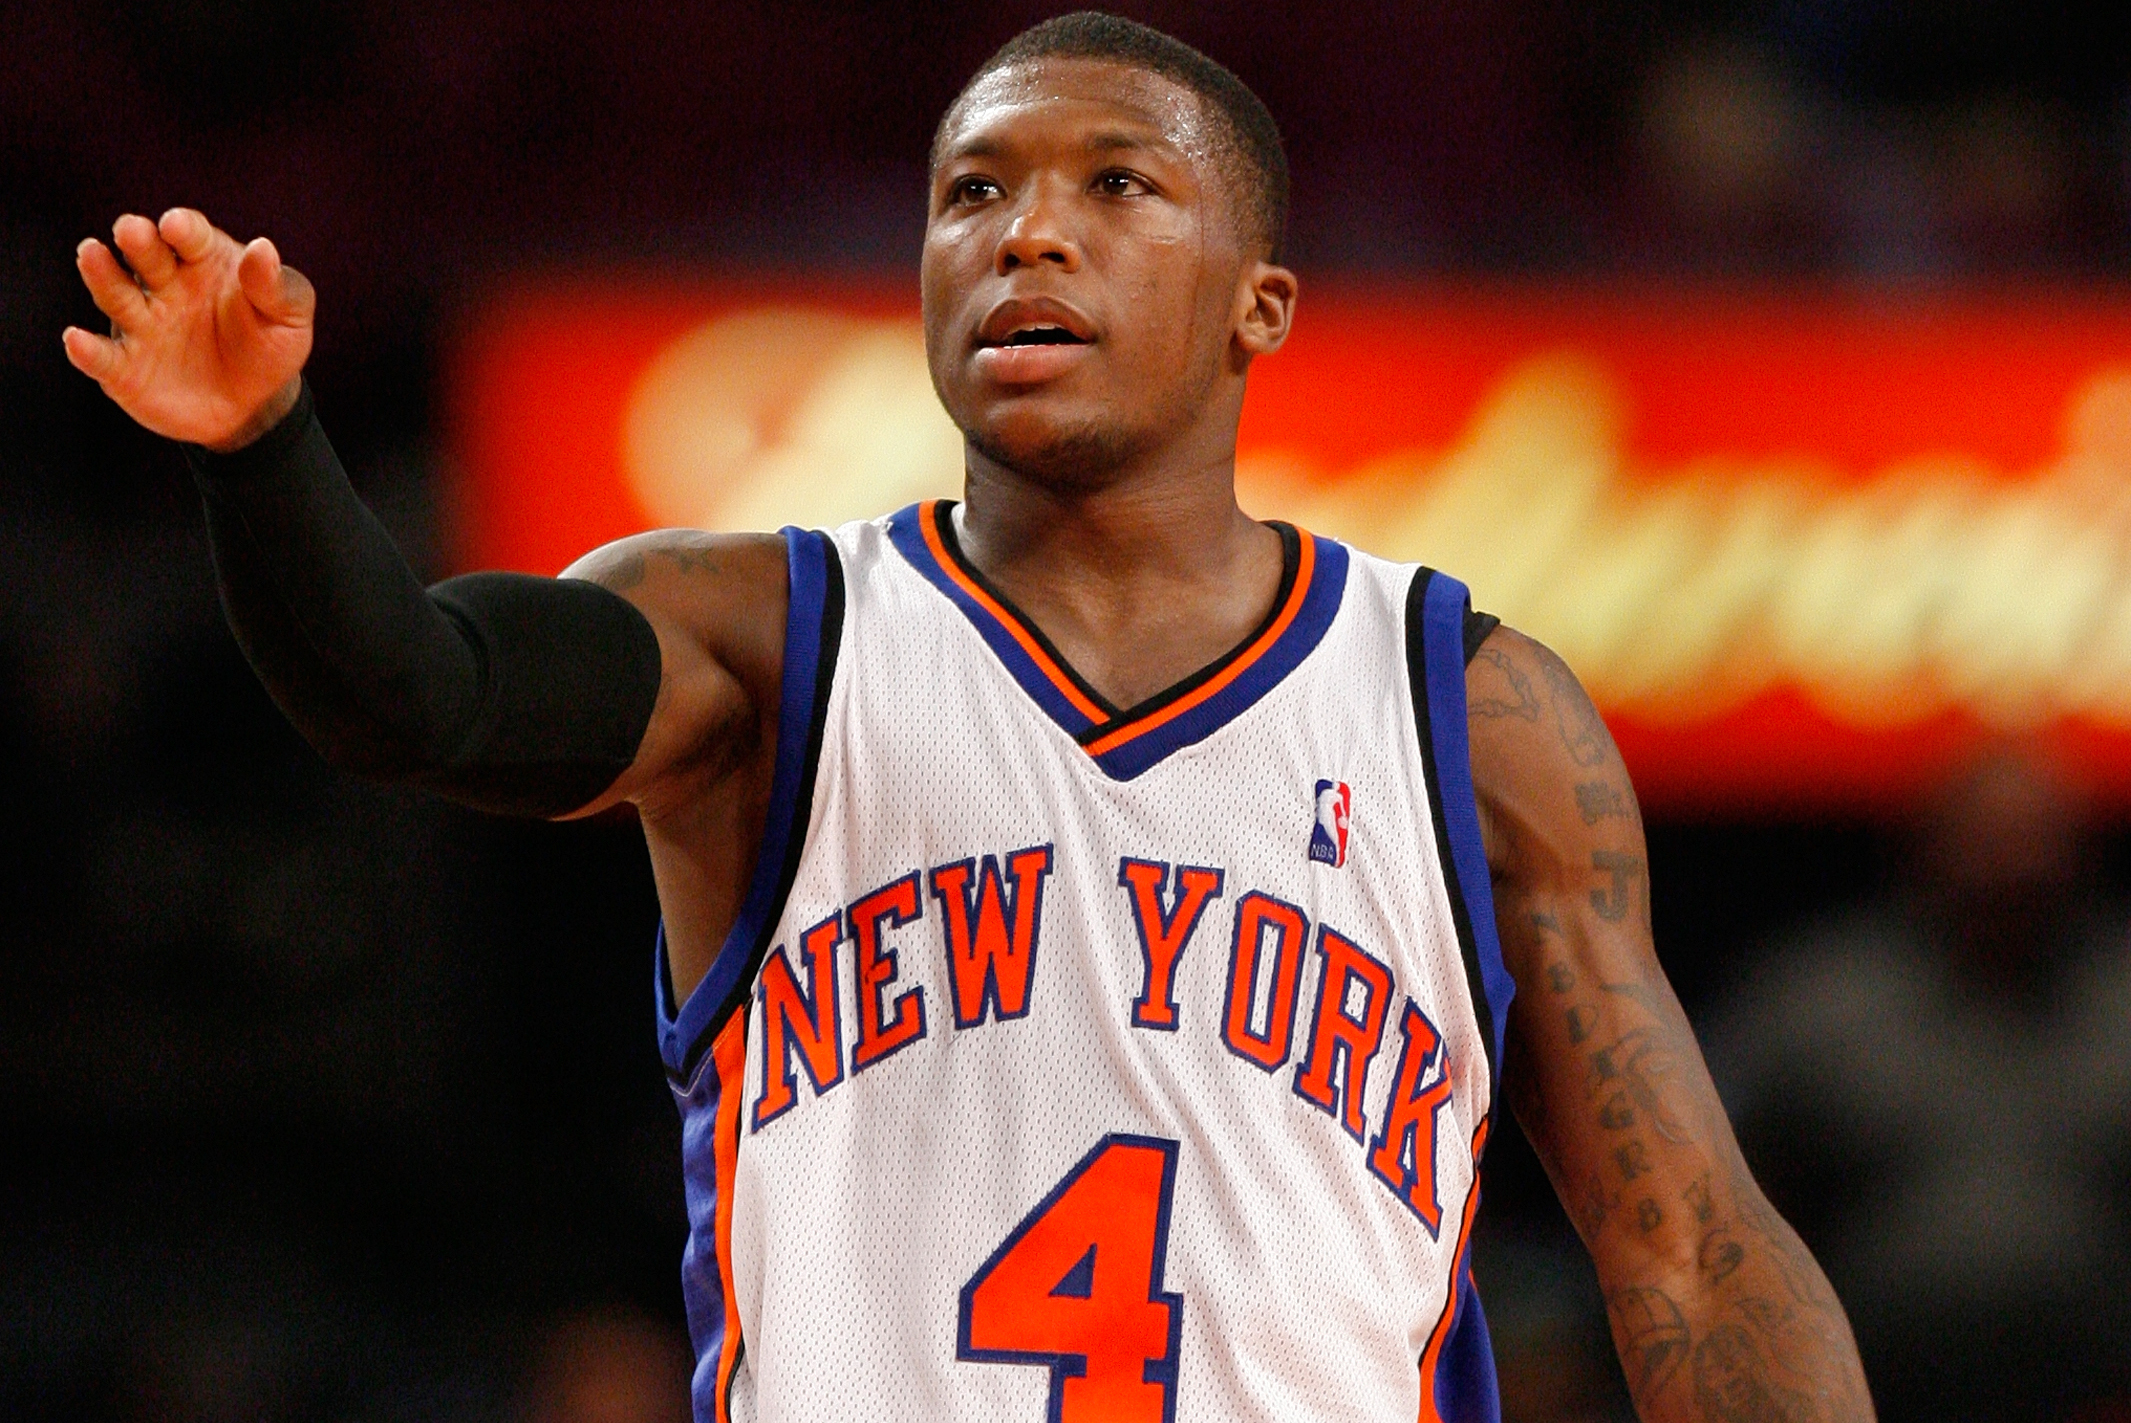 Nate Robinson Says He's Open to NBA Return While Training for Jake